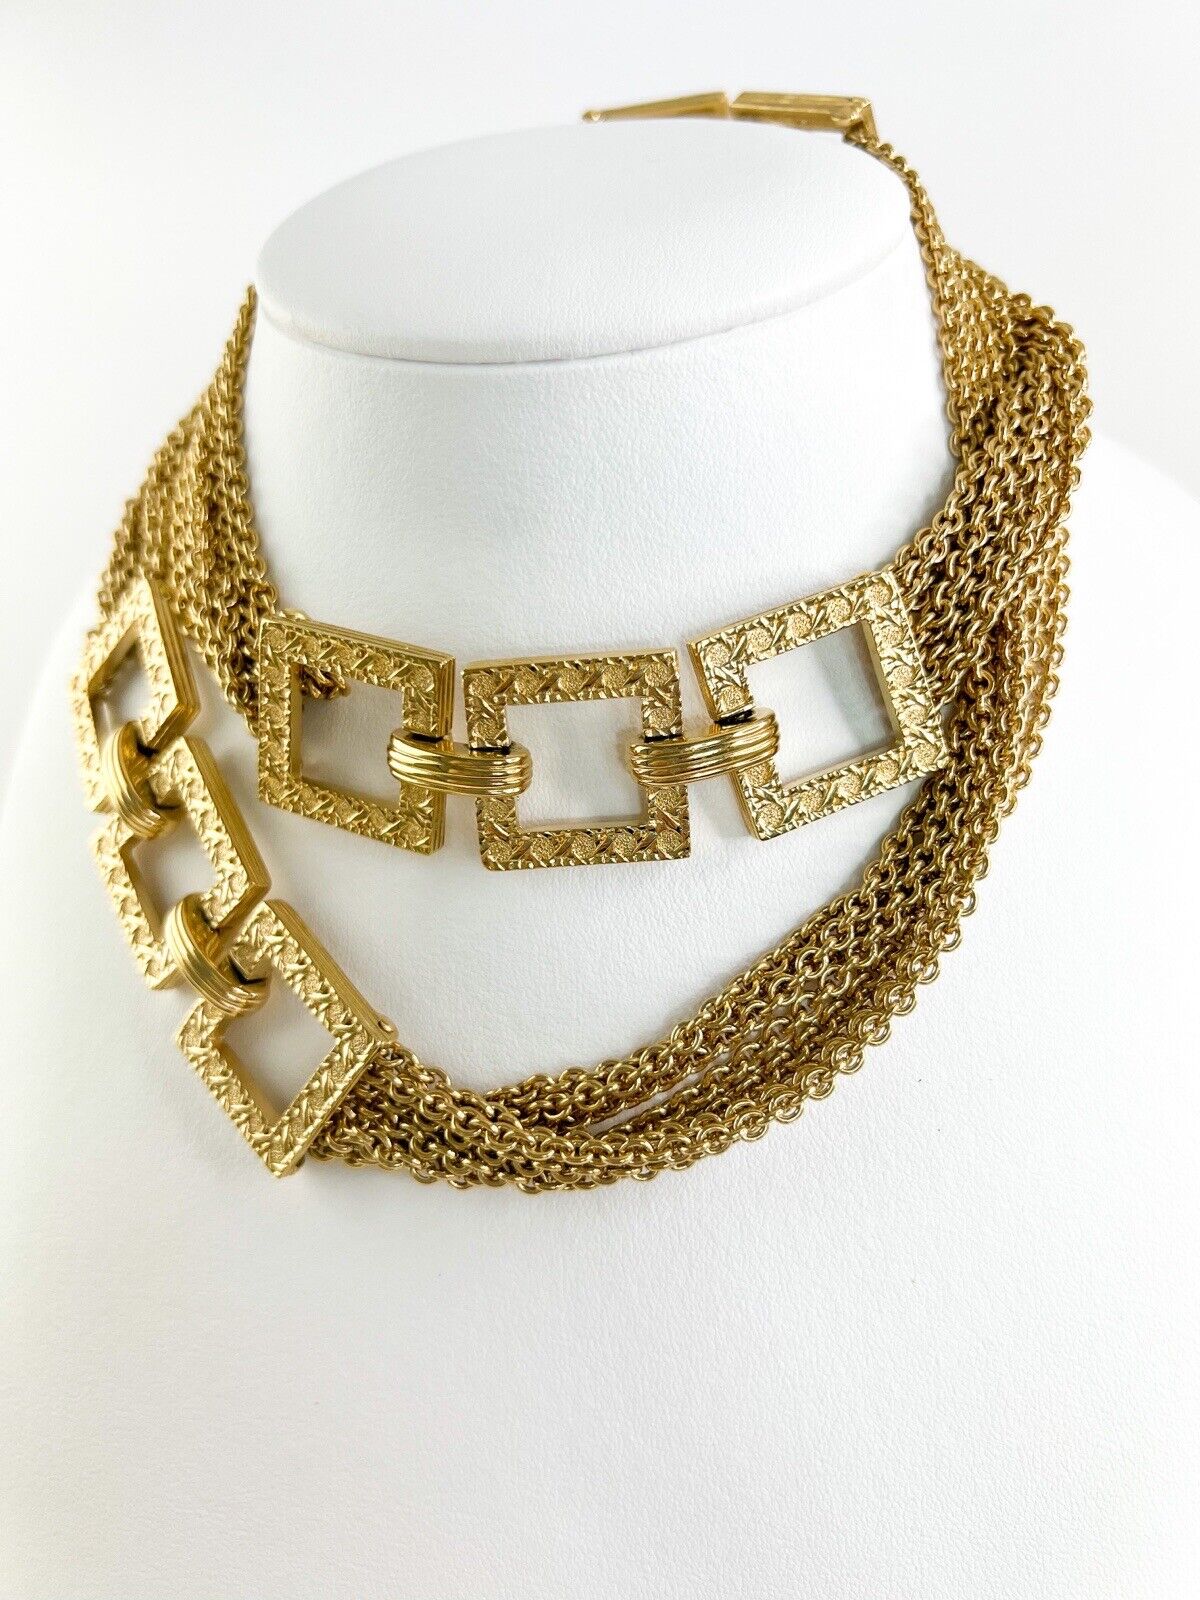 Vintage Christian Dior Necklace, Choker Necklace Gold, Vintage necklace , Bridal Jewelry, Wedding Jewelry, Jewelry for Women, Gift for her